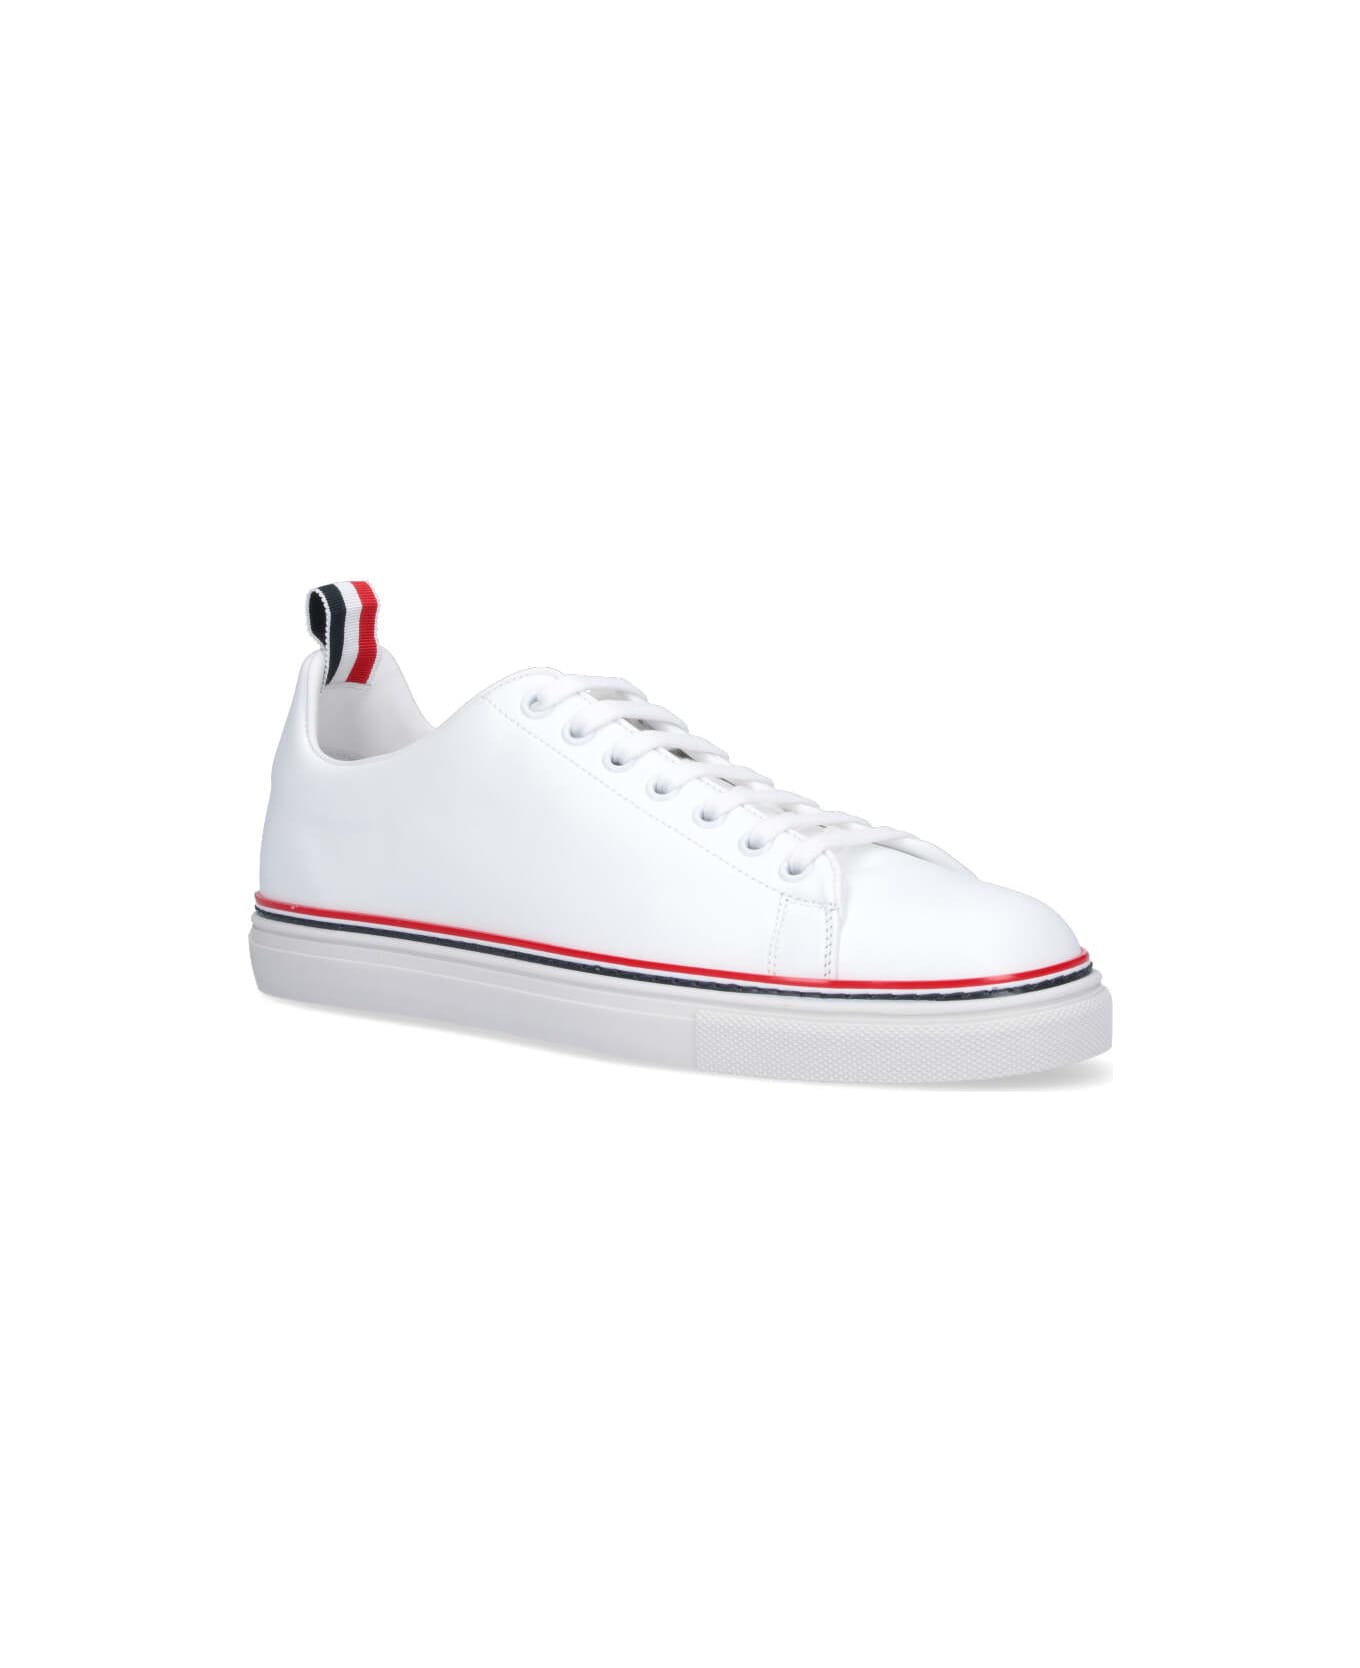 Thom Browne Calf Leather Tennis Shoes - White スニーカー